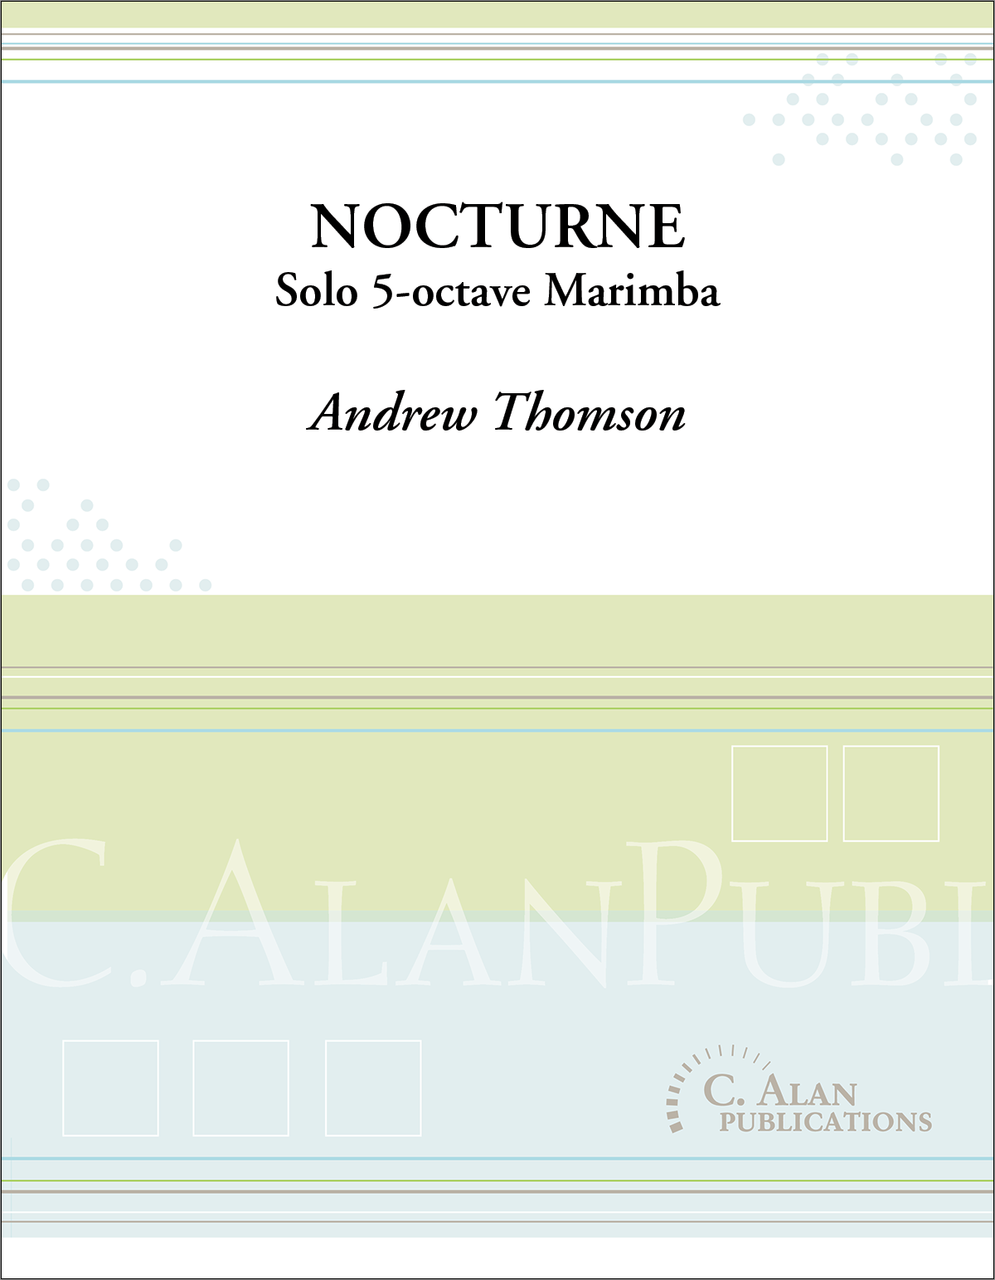 Nocturne by Andrew Thomson